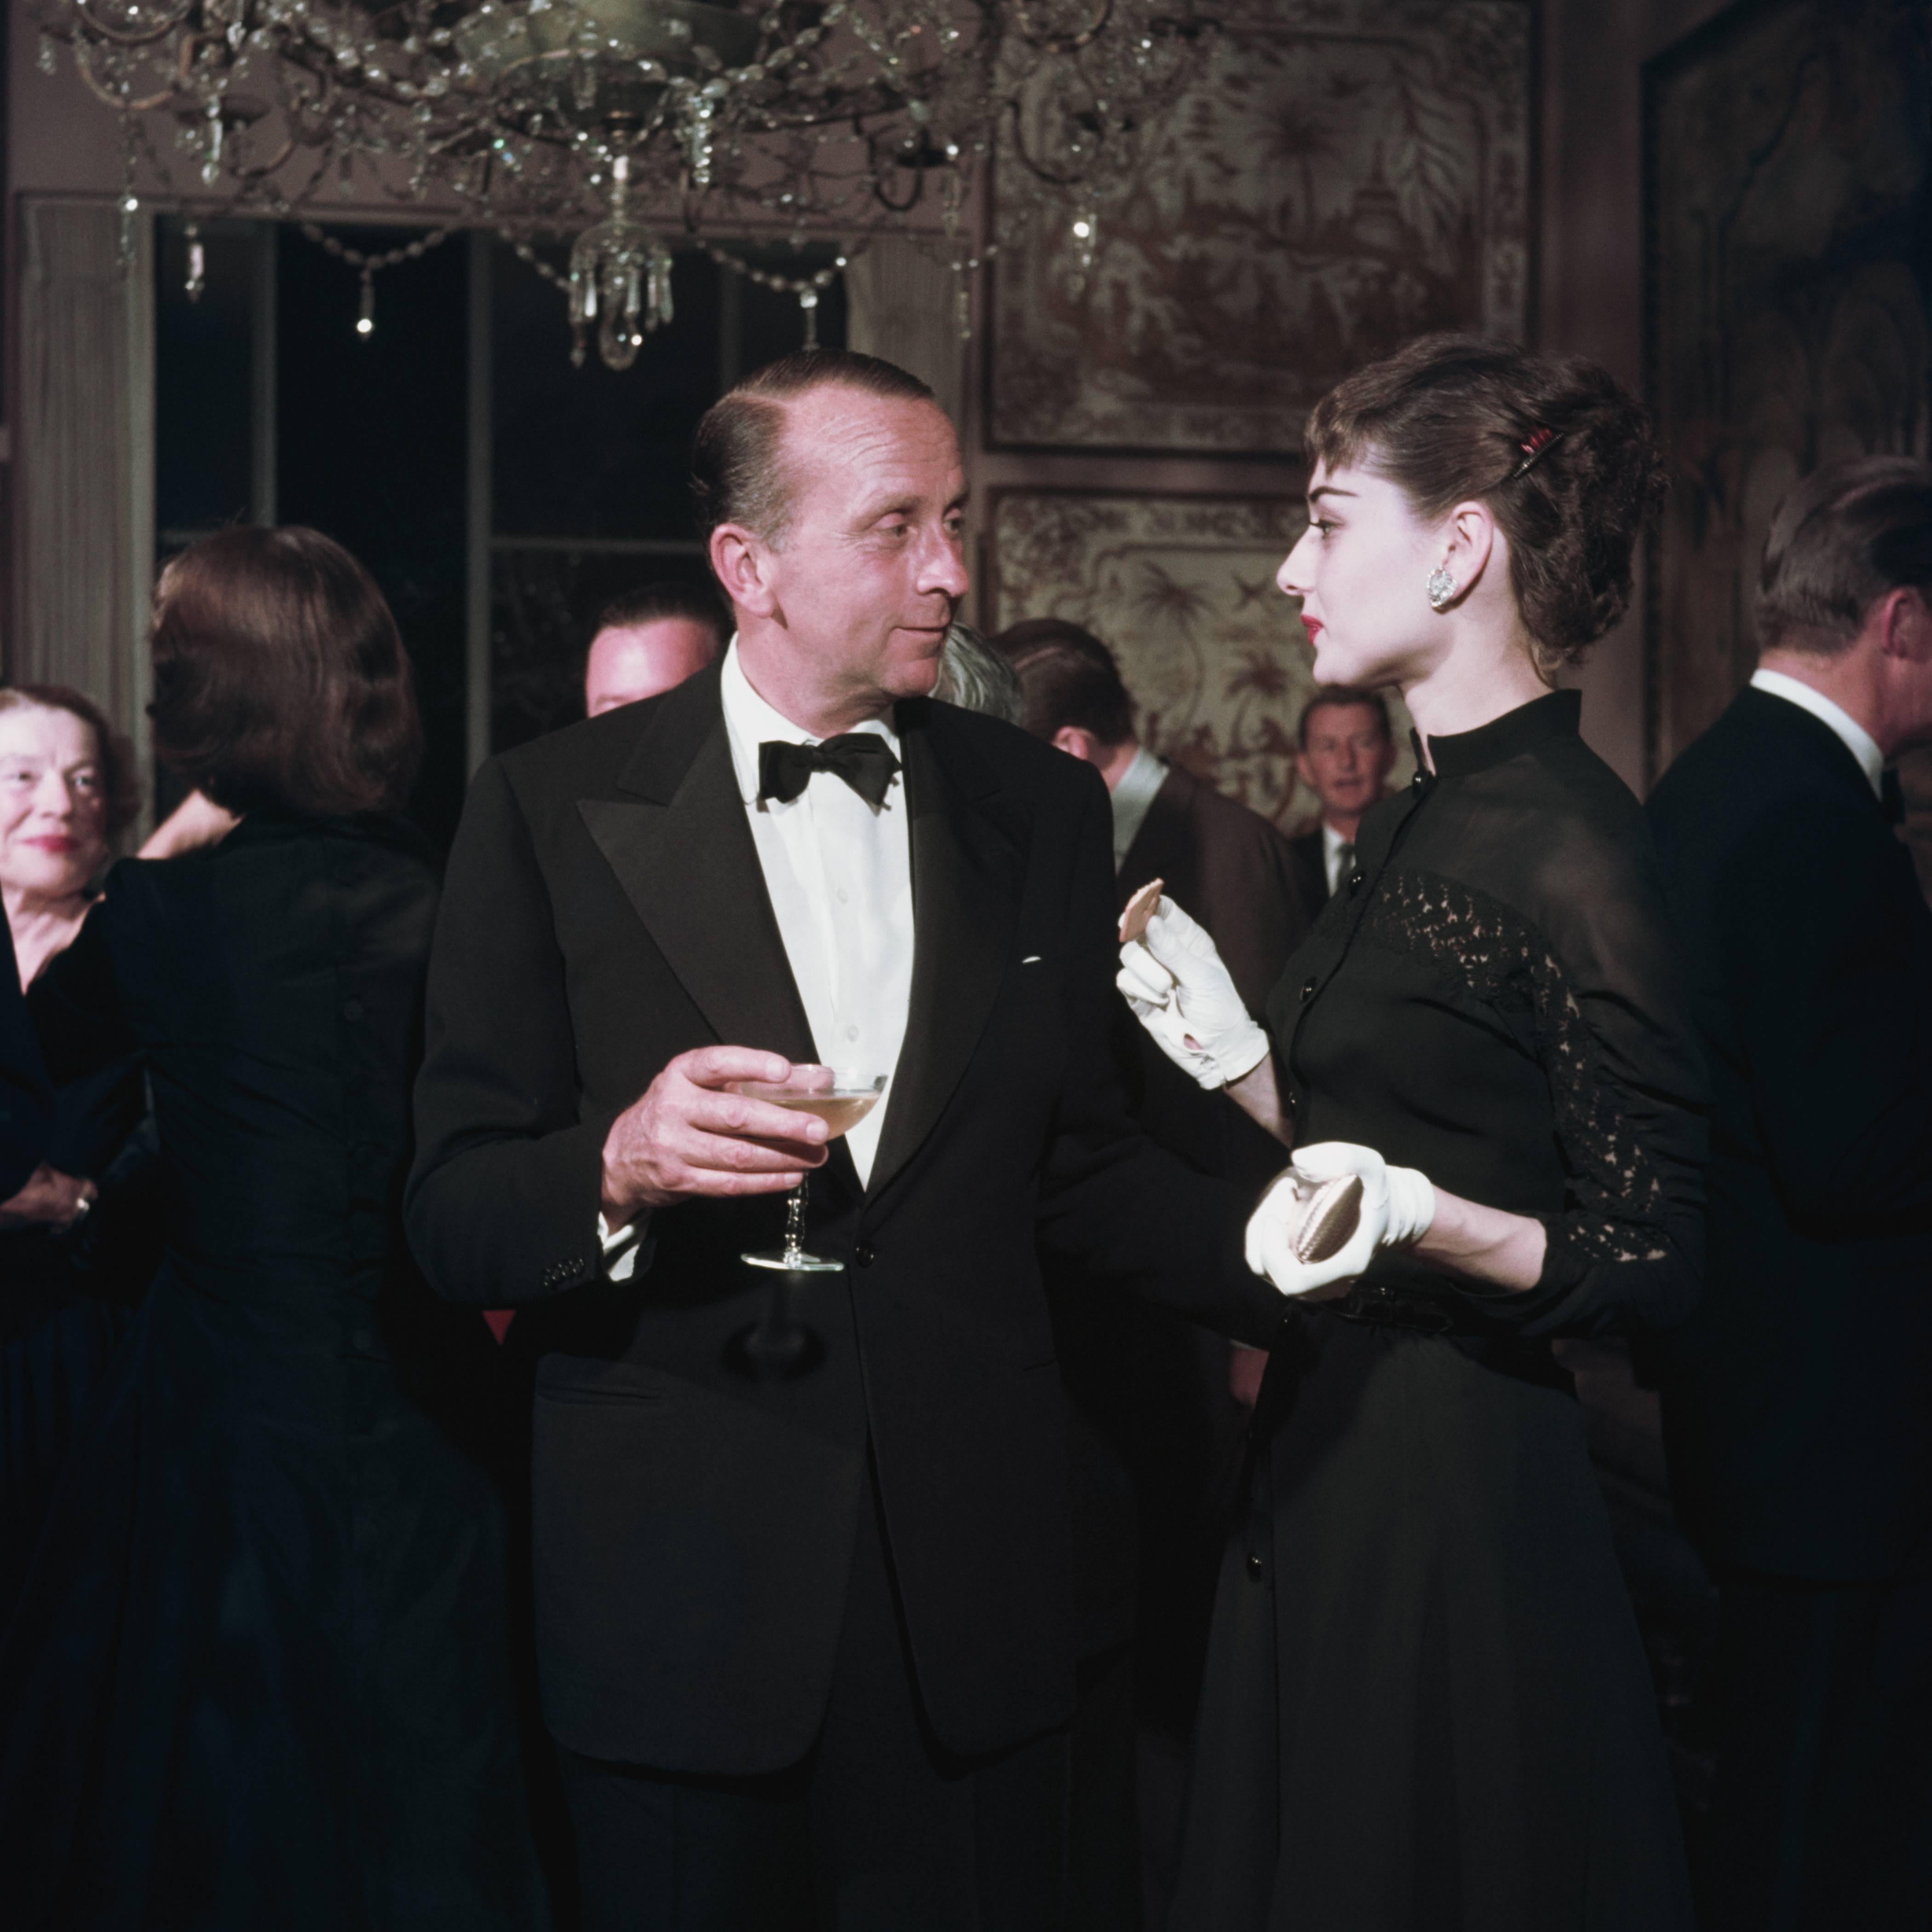 circa 1960: West coast socialite Whitney Warren talking to film star Audrey Hepburn (1929 - 1993) at a party in San Francisco where she is appearing in a production of 'Ondine'. A Wonderful Time - Slim Aarons (Photo by Slim Aarons/Getty